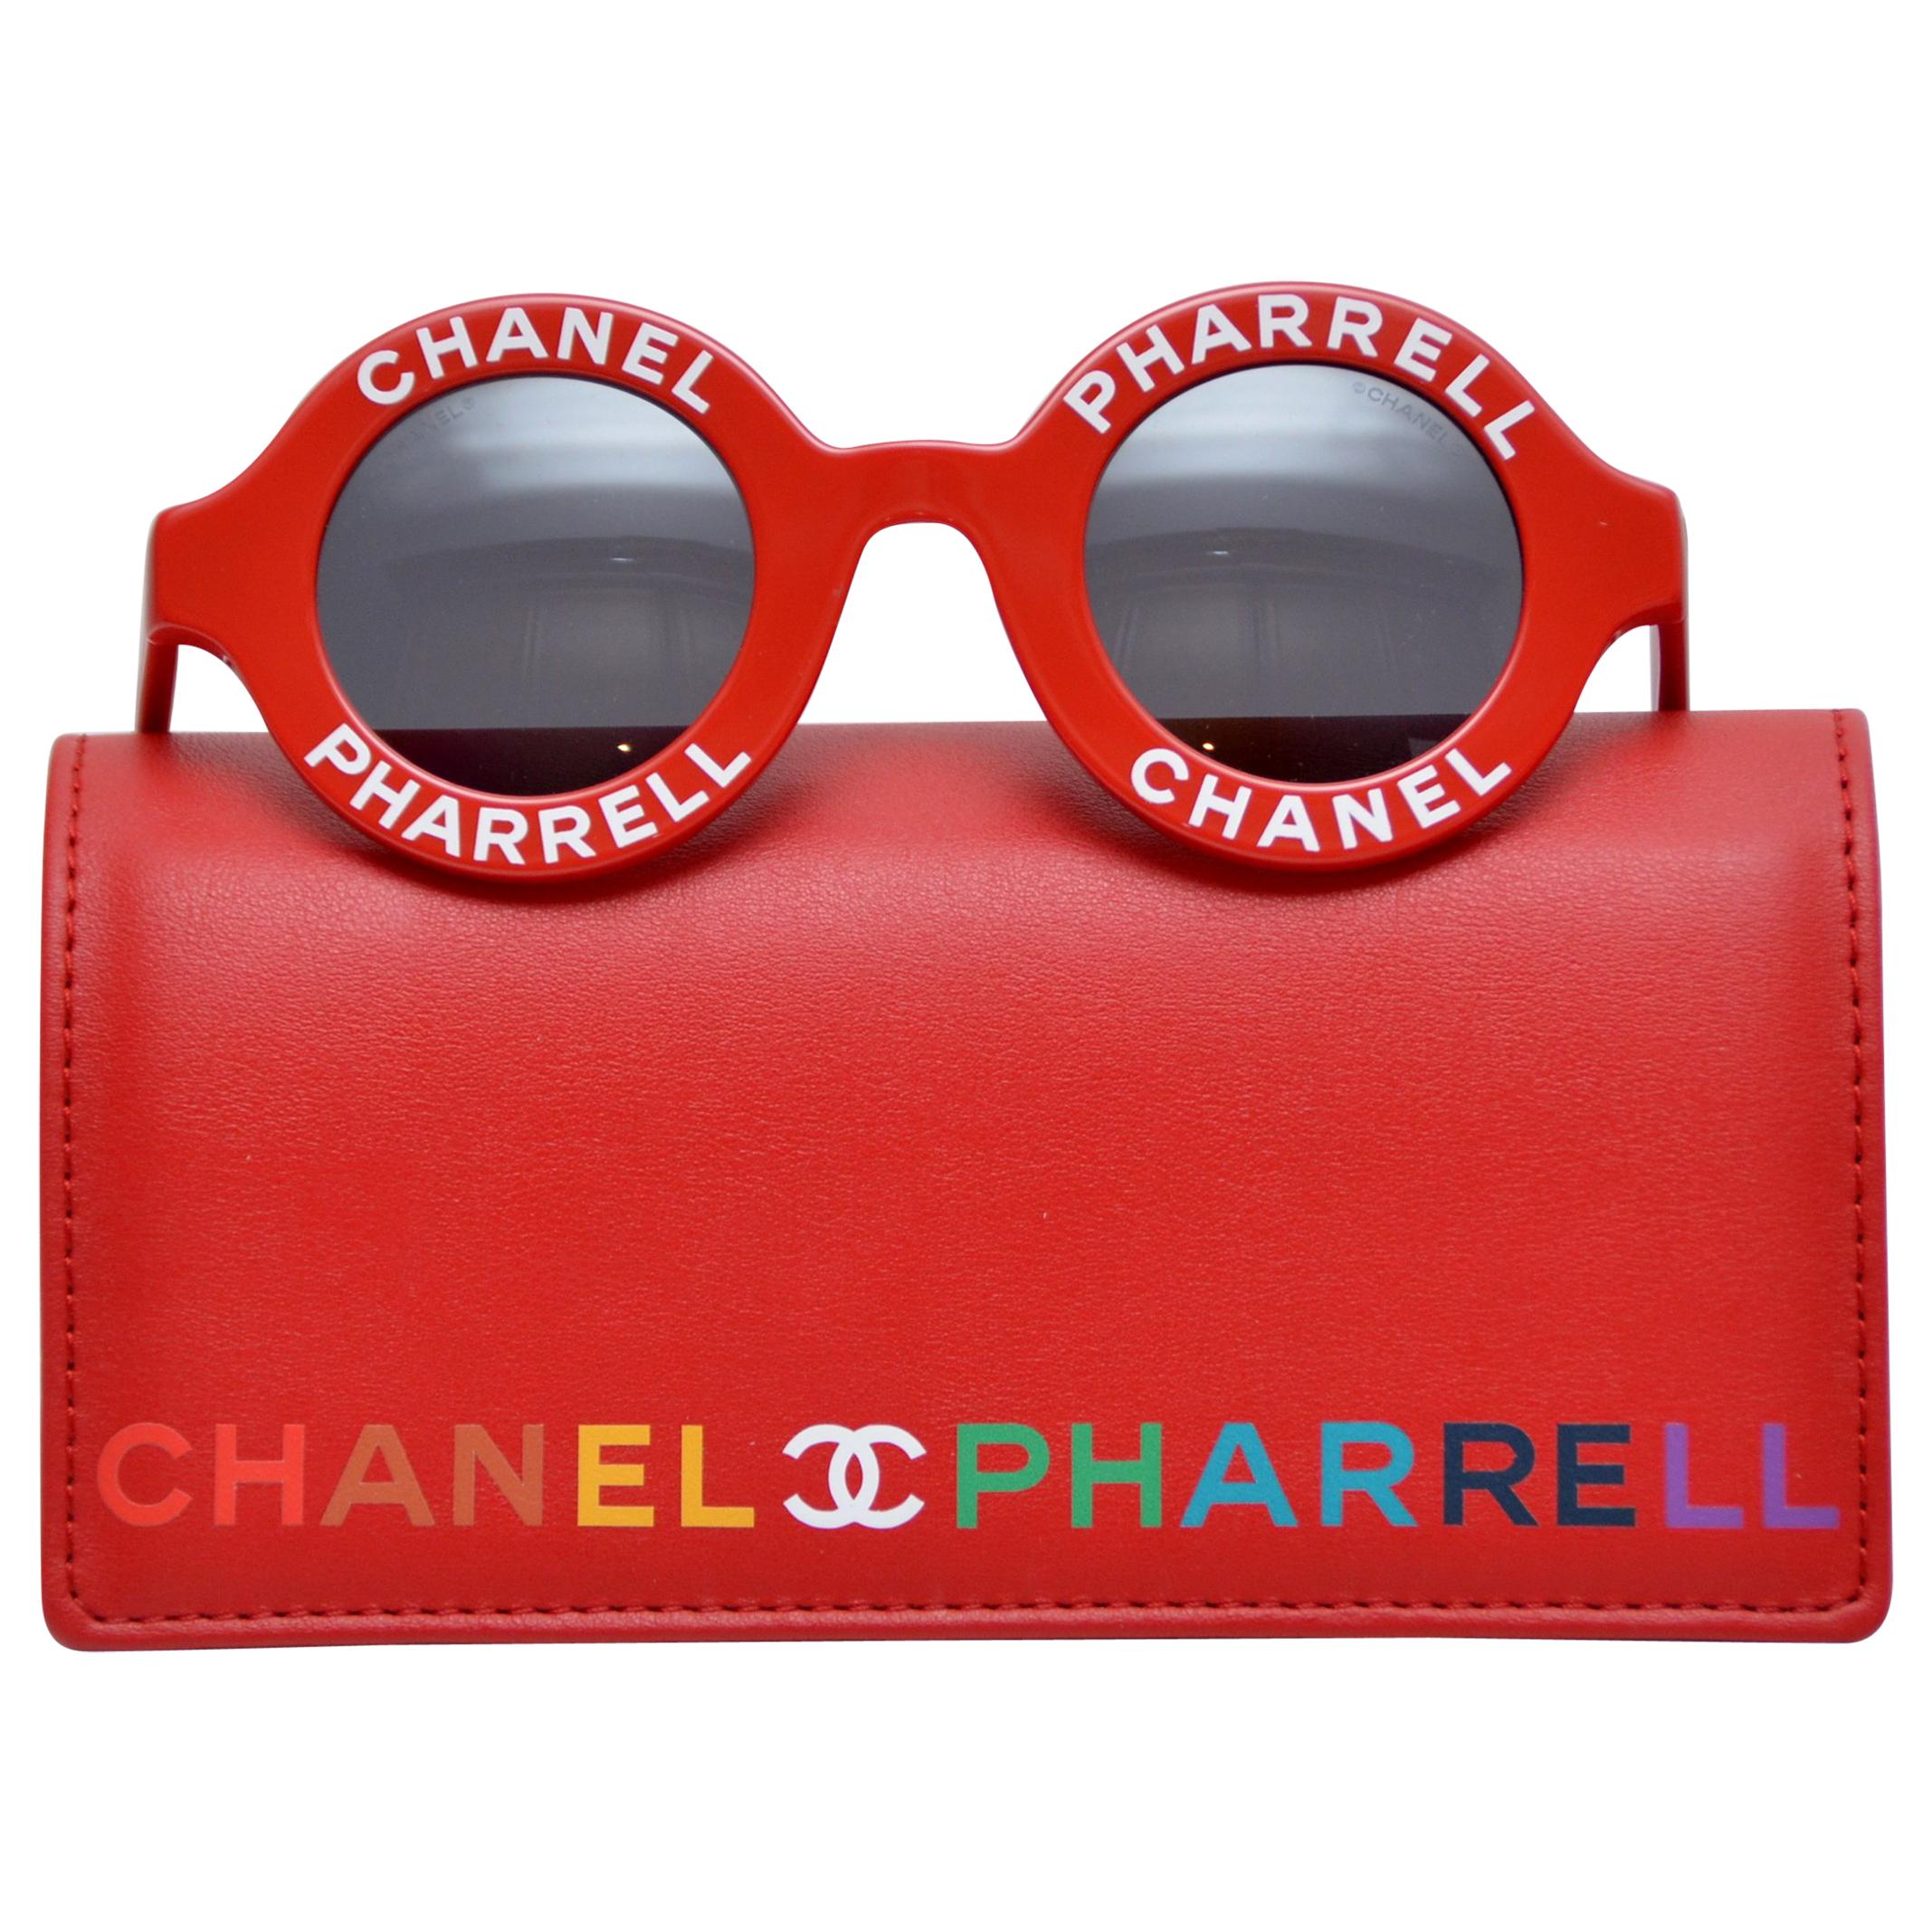 pharrell chanel collection